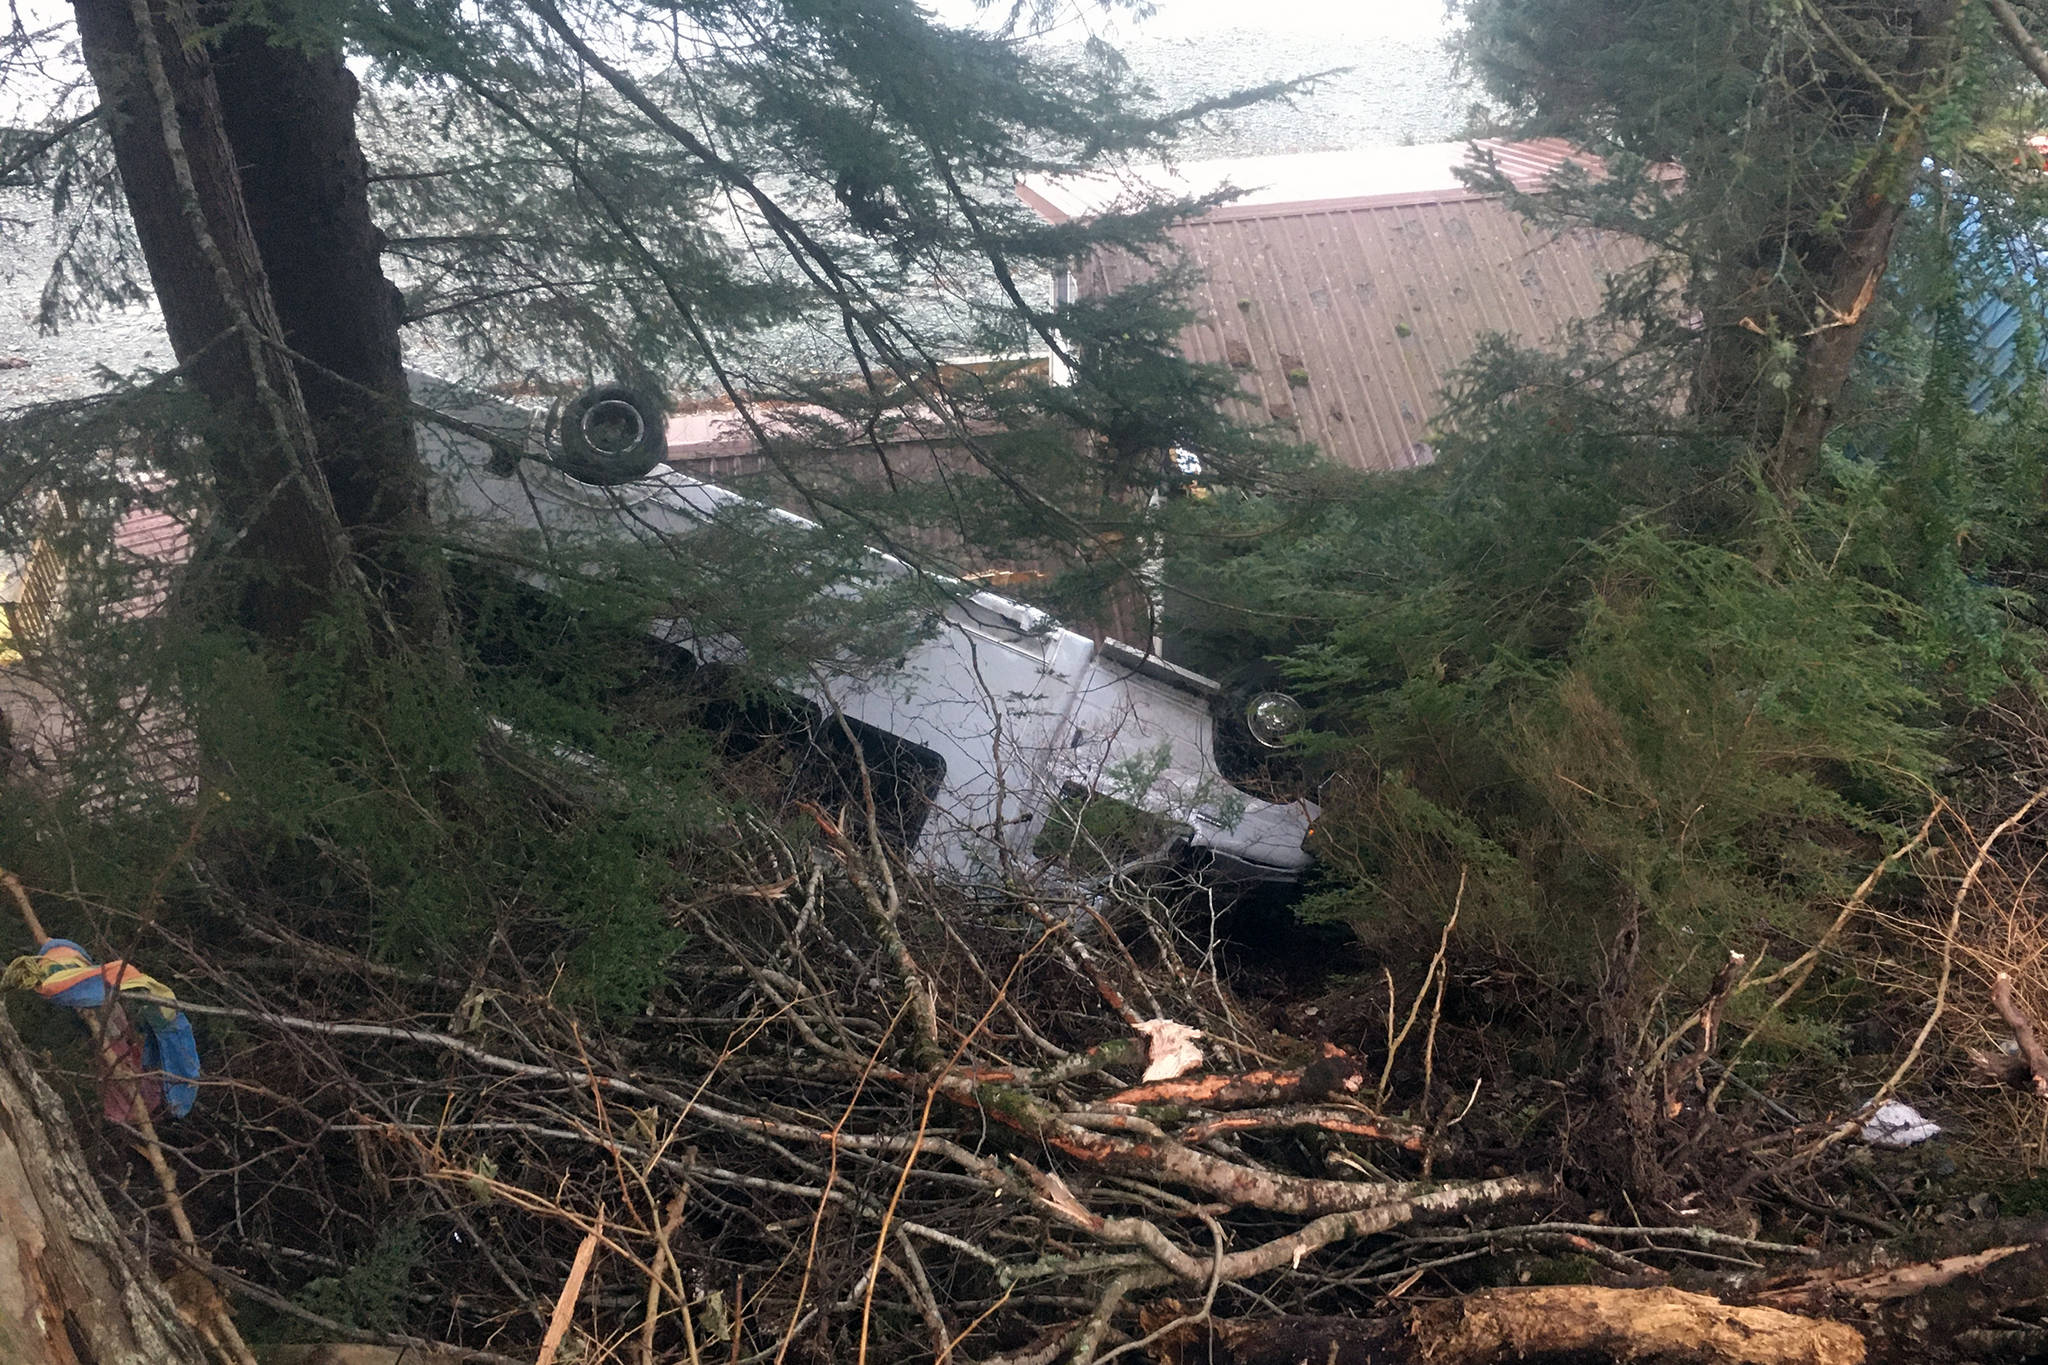 A bus landed on the roof of a house out the road after driving off the road on Nov. 26, 2020. The bus and house were empty, and the driver of the bus was uninjured. (Michael S. Lockett / Juneau Empire)